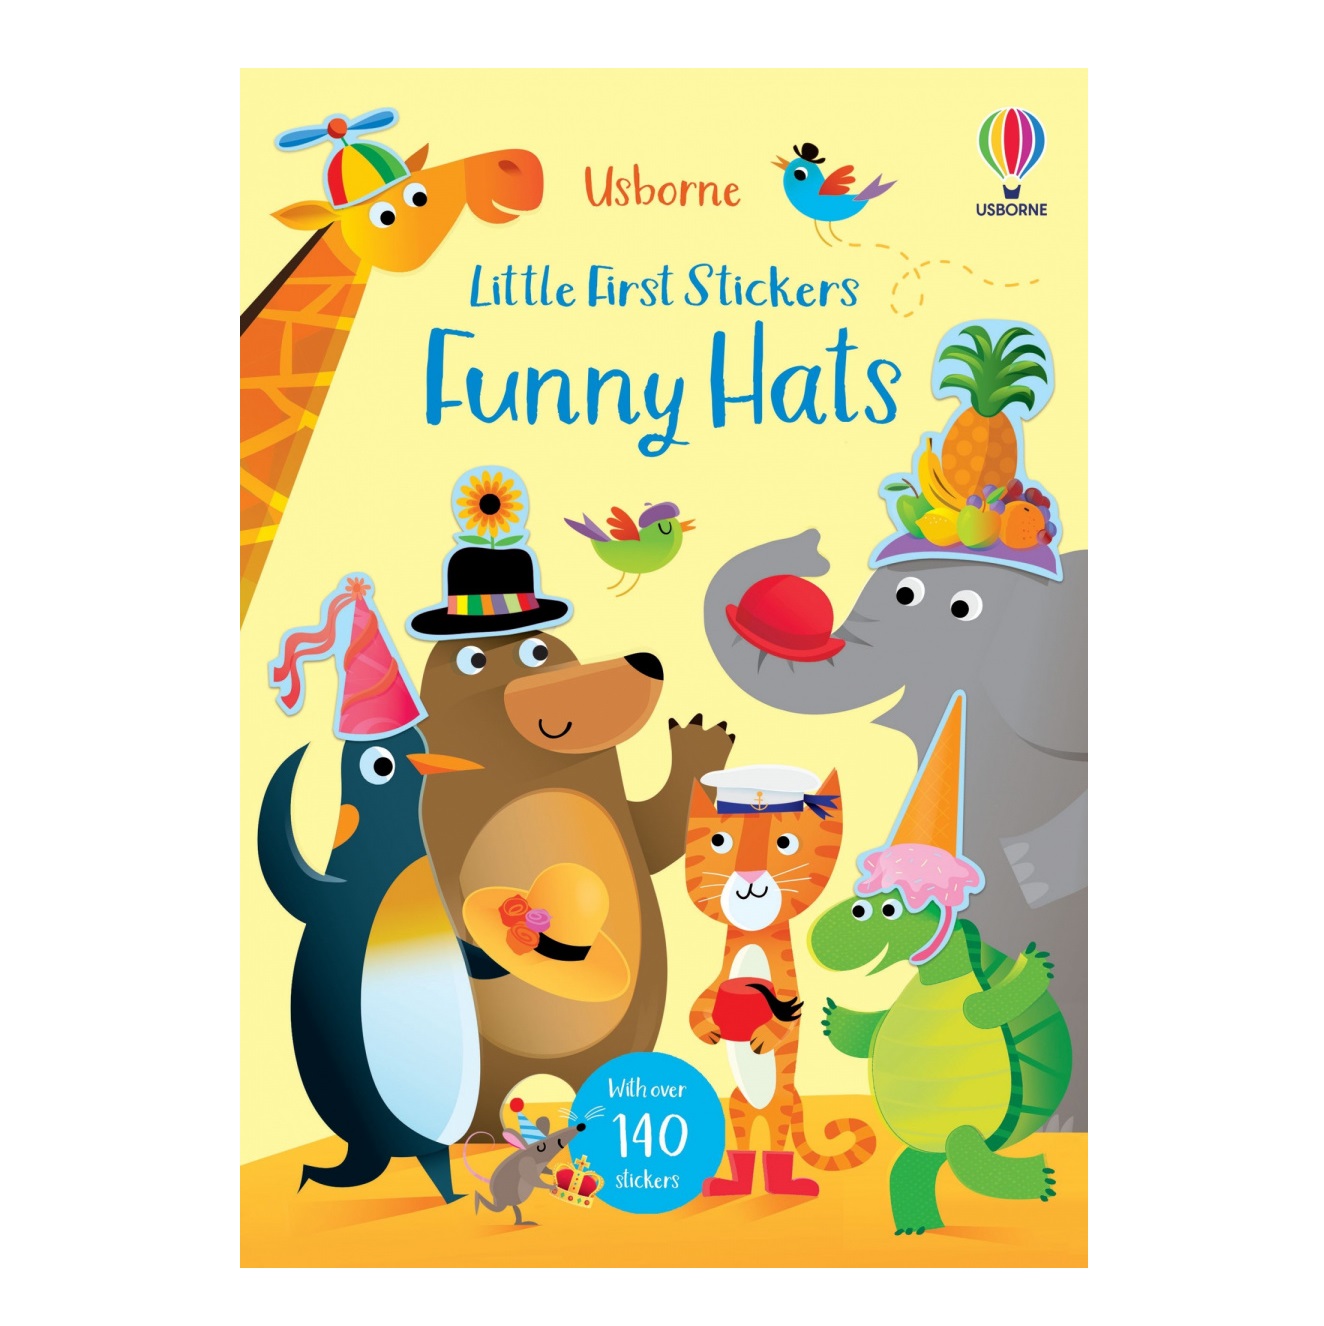 Little First Stickers Funny Hats - Jessica Greenwell, англ. язык (9781474986540) - фото 1